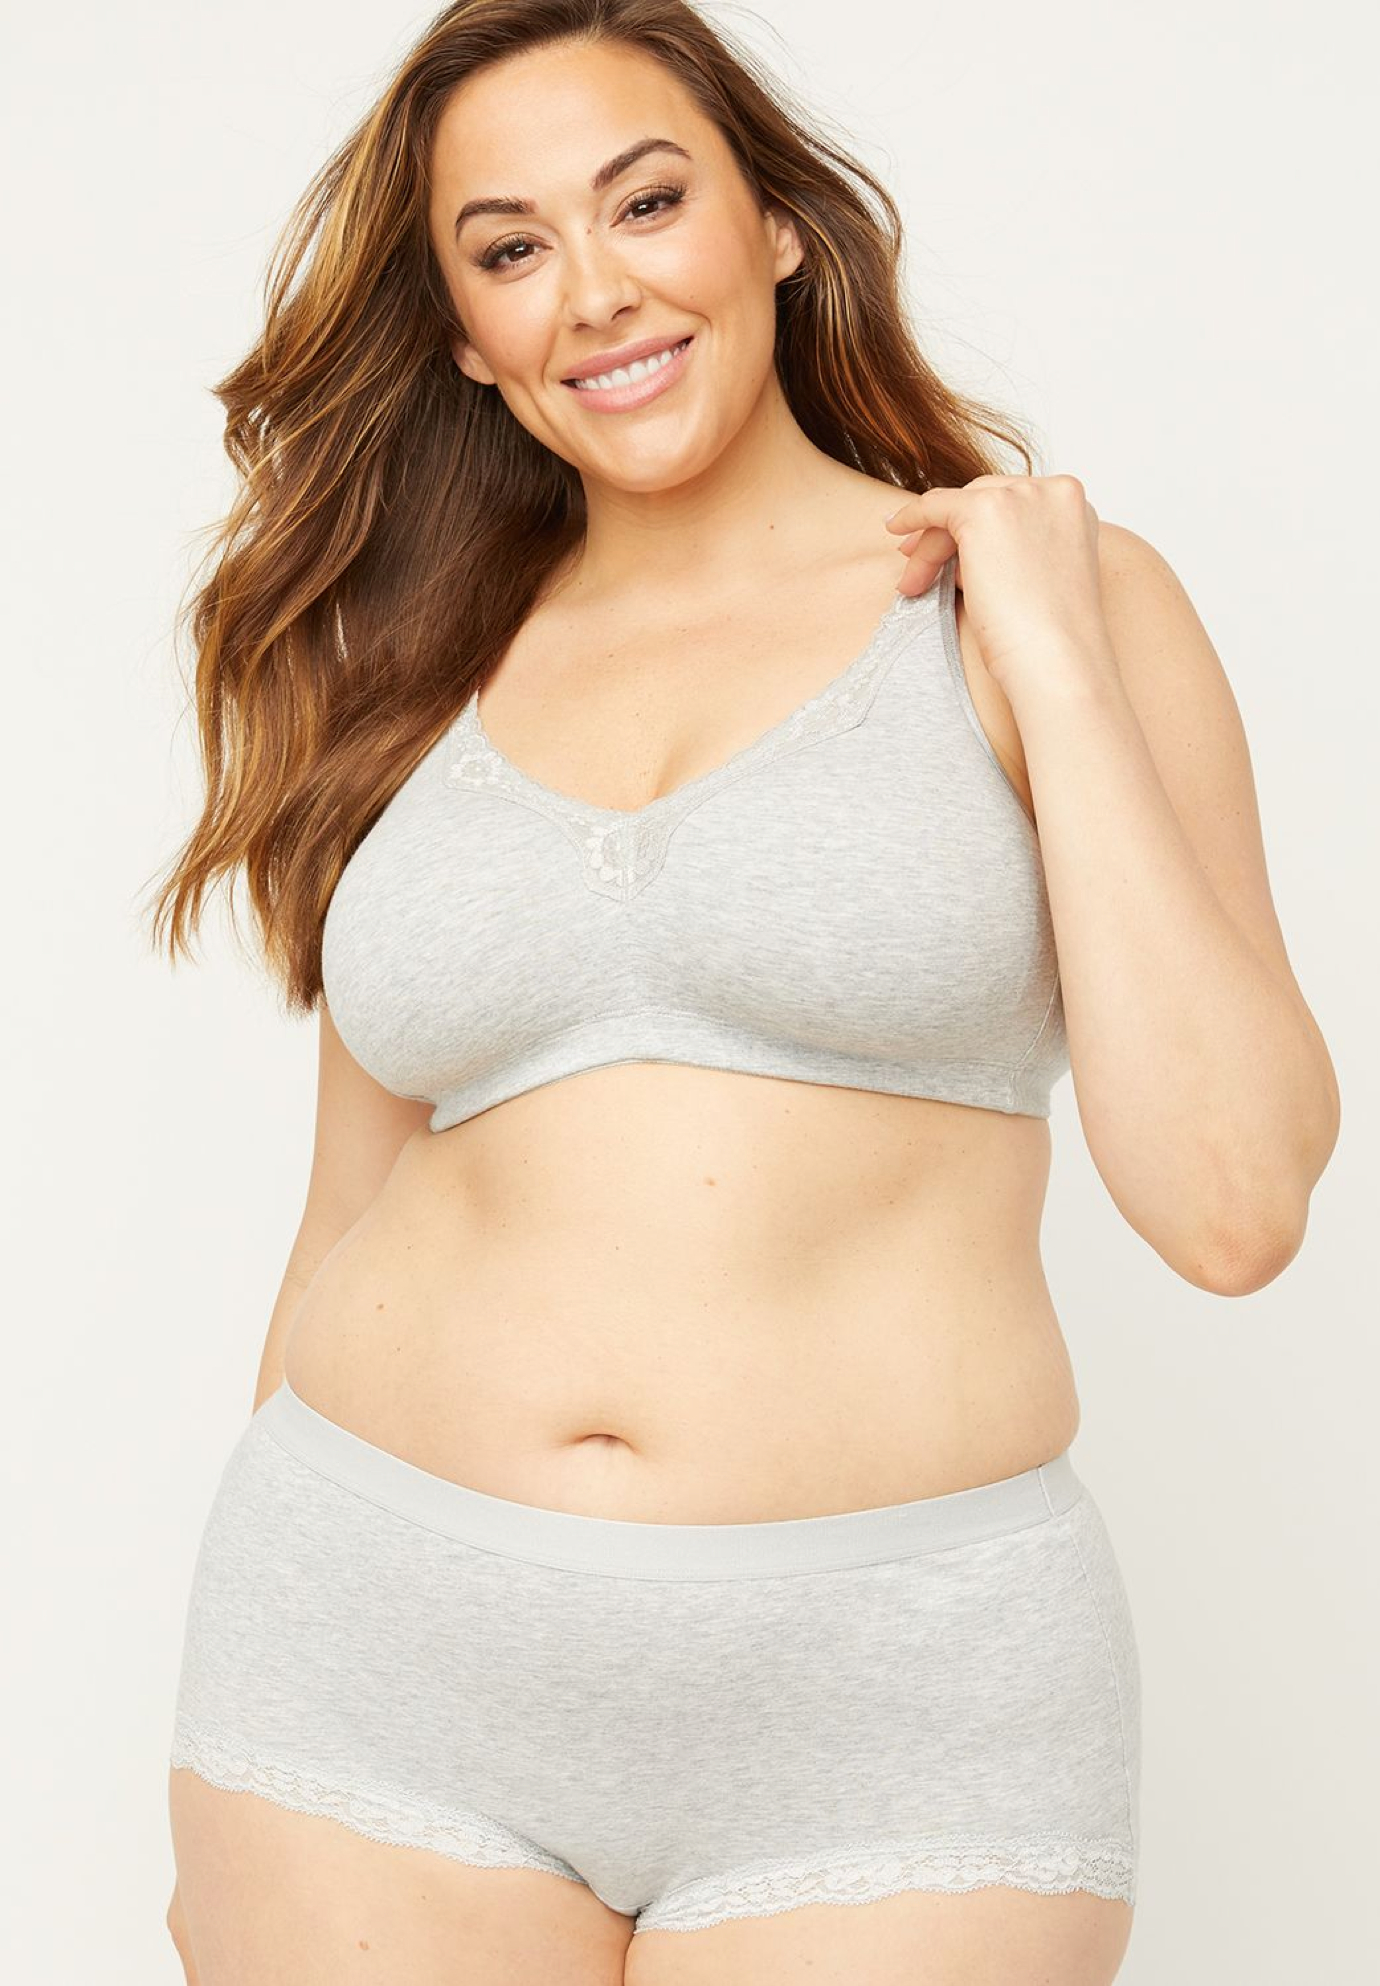 Catherines Plus Sizes - Shop our $8 Serenada® No-Wire Cotton Comfort Bra at  catherines.com for today's Deal of the Day!  .lanebryant.com/plus-size-clearance/deal-of-the-day/13788c19883/index.cat